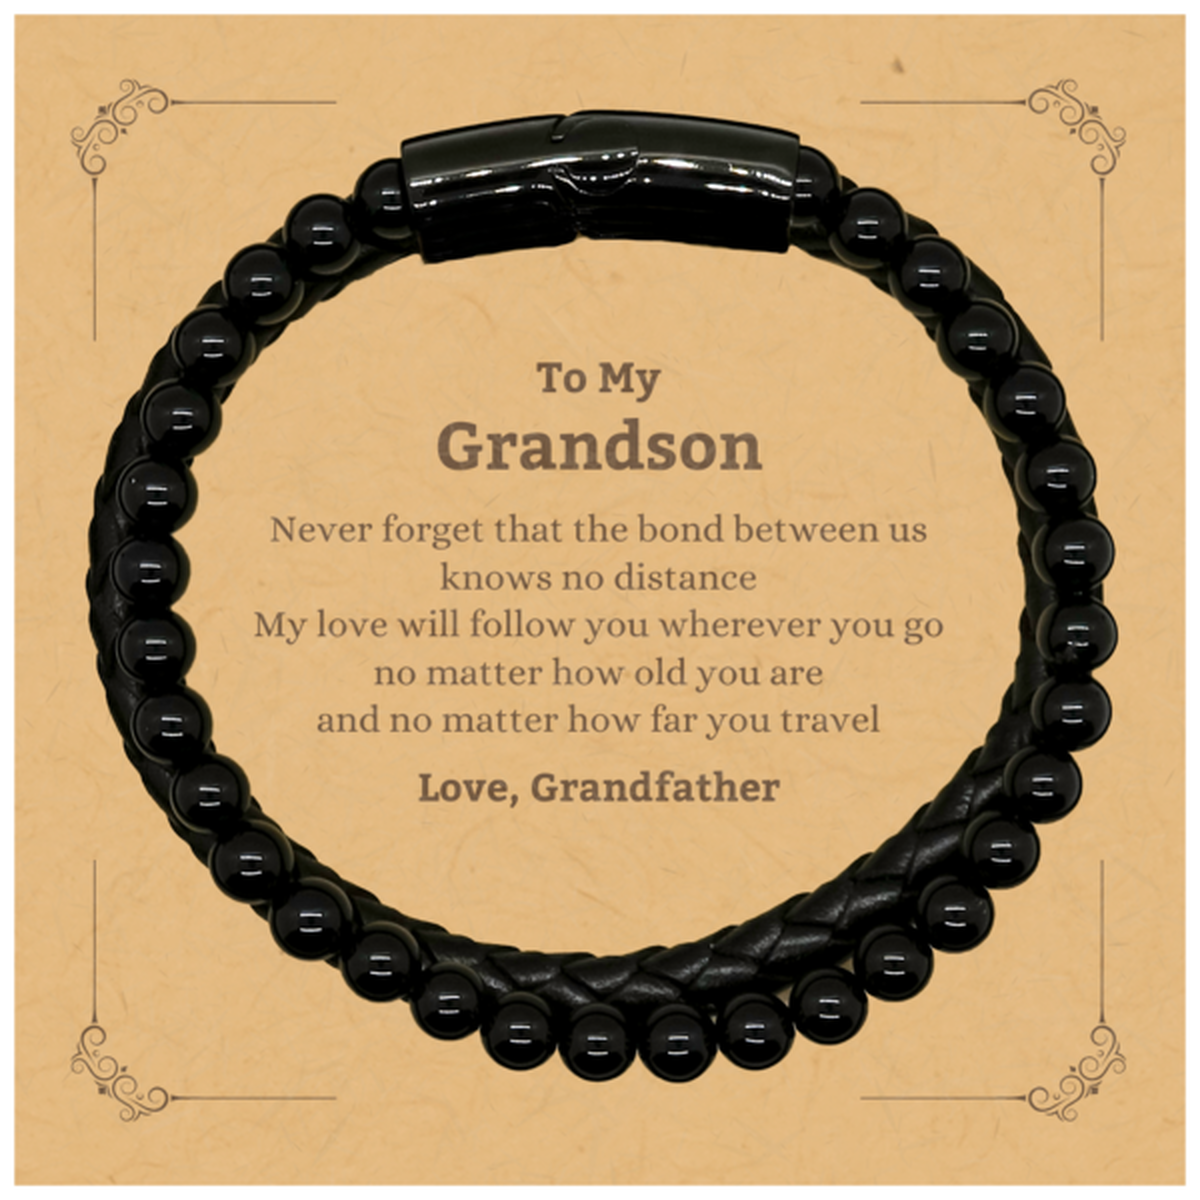 Grandson Birthday Gifts from Grandfather, Adjustable Stone Leather Bracelets for Grandson Christmas Graduation Unique Gifts Grandson Never forget that the bond between us knows no distance. Love, Grandfather